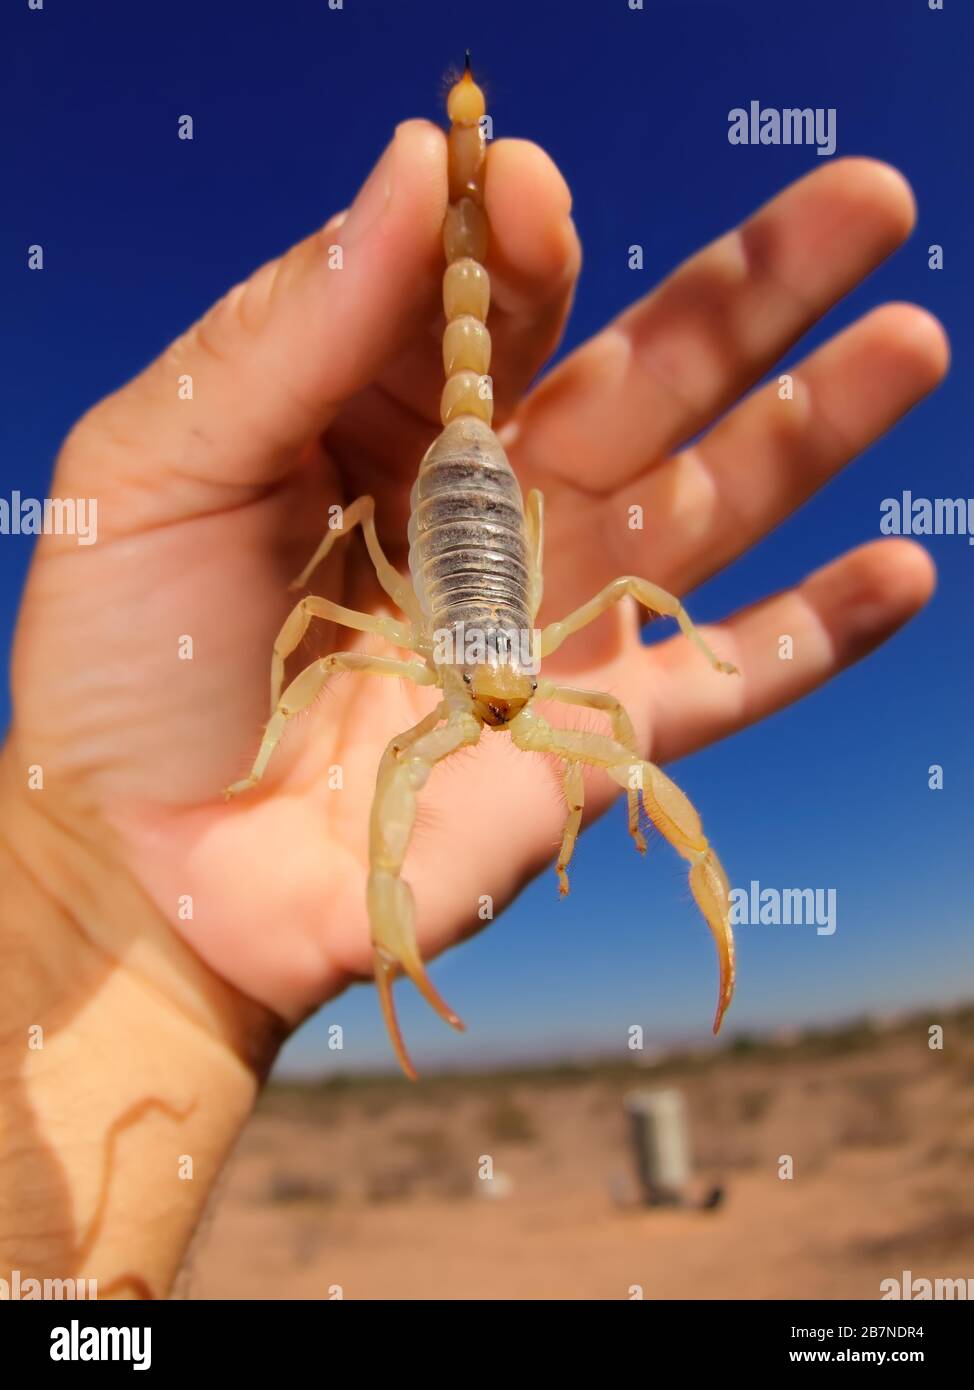 A Scorpion native to Arizona being held by its tail. Stock Photo